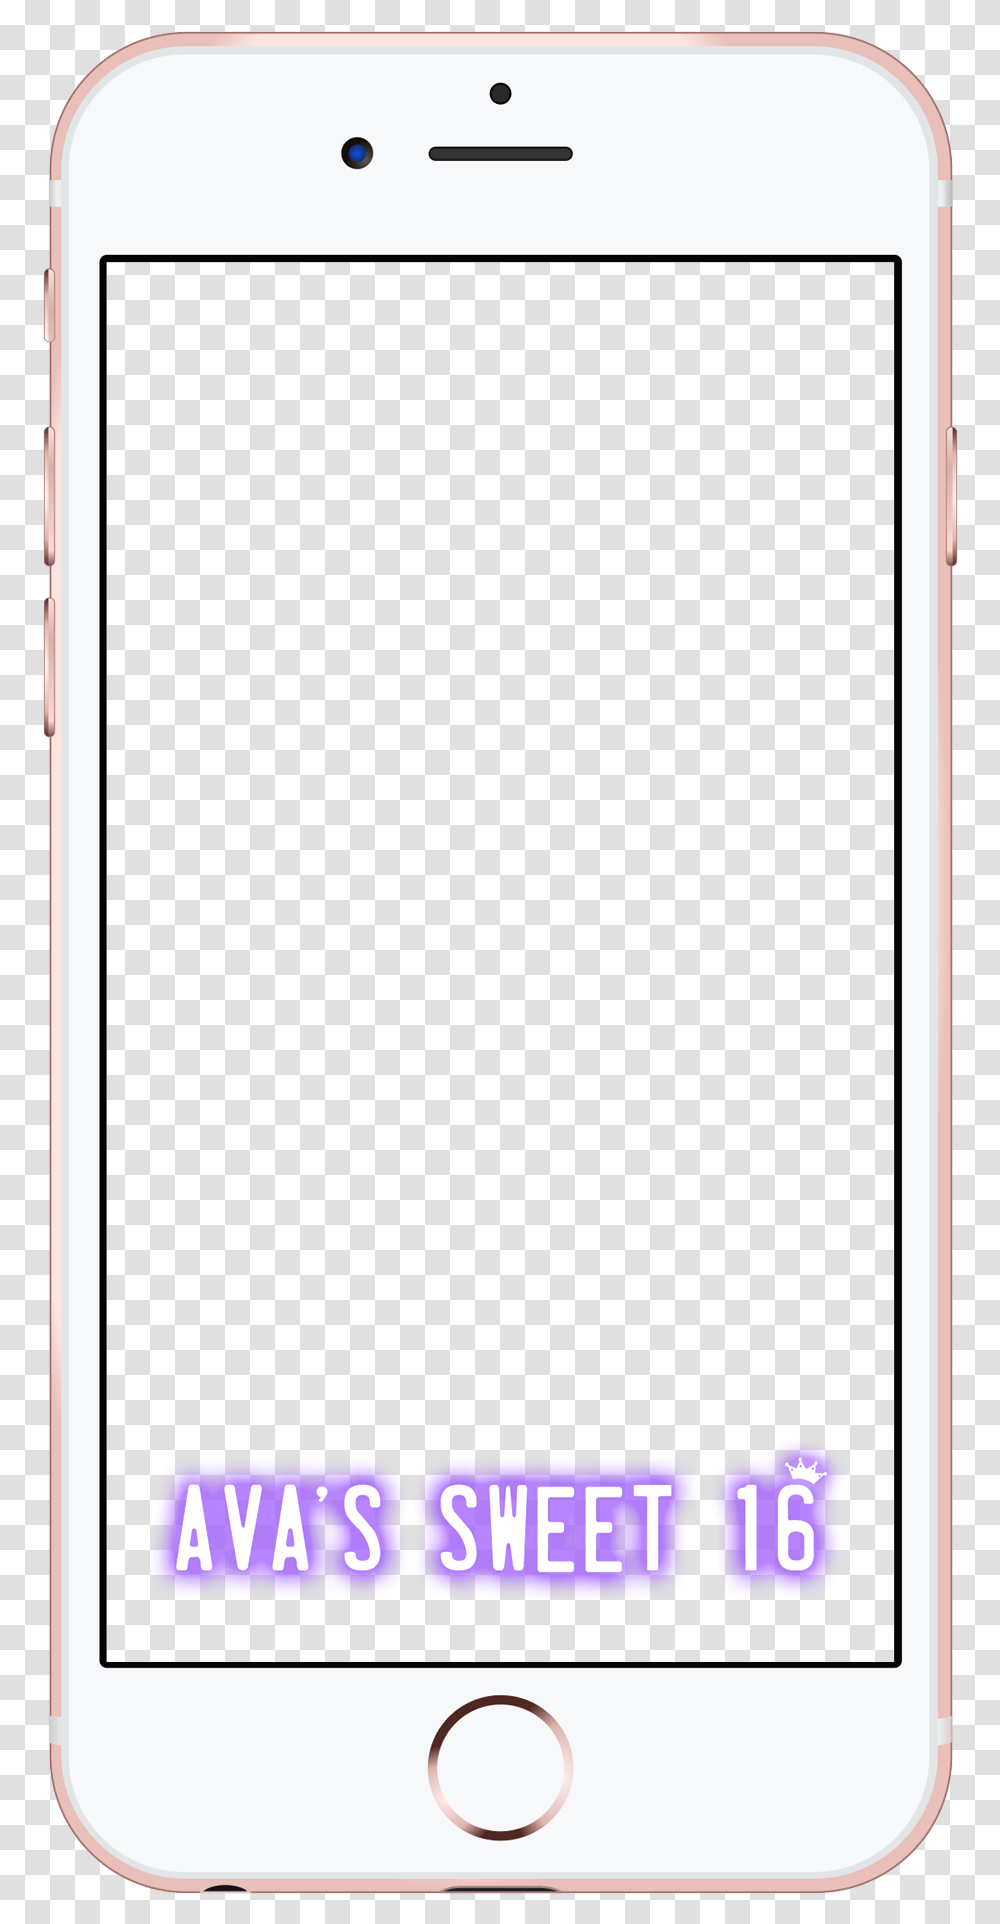 Snapchat Screen Vector Royalty Free Stock Display Device, Mobile Phone, Electronics, Cell Phone, Iphone Transparent Png